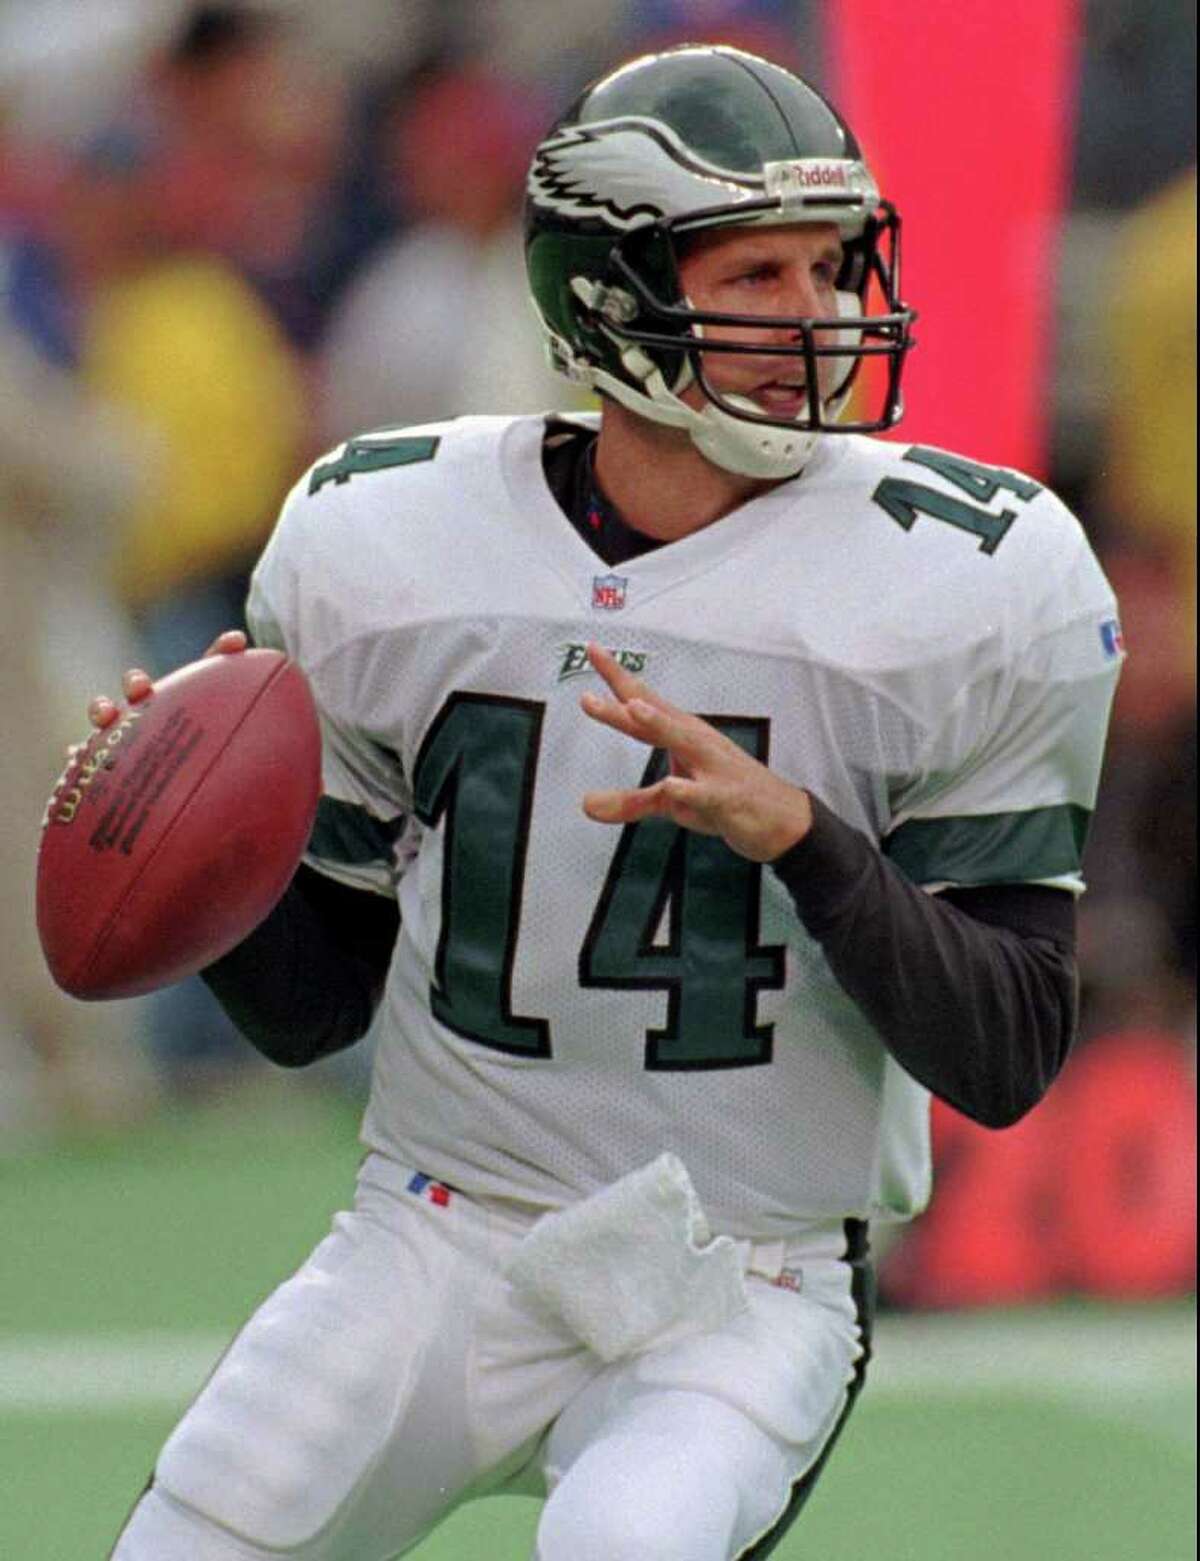 Philadelphia Eagles quarterback Ty Detmer prepares to pass in the second quarter vs. the Miami Dolphins, Sunday, Oct. 20, 1996, in Philadelphia's Veterans Stadium. Detmer has gone from being a woozy replacement to a winning starter for the Philadelphia Eagles.